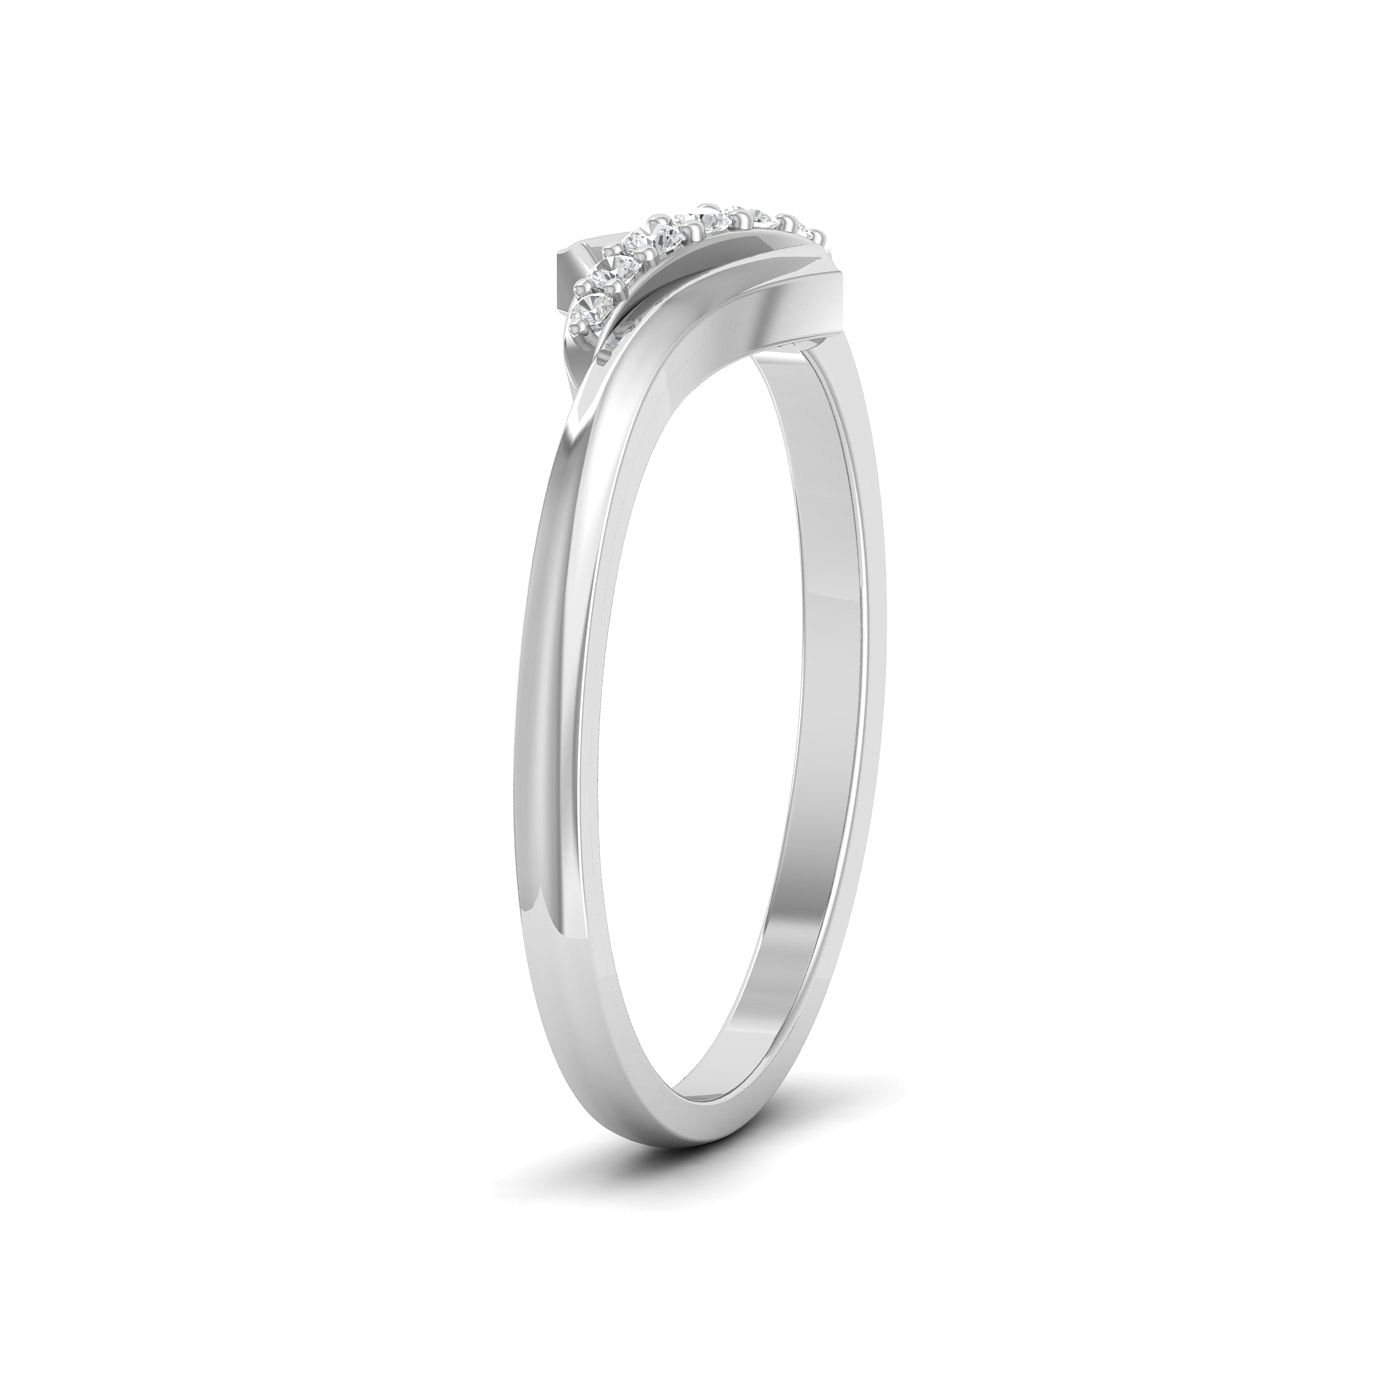 Juliette Daily Wear Diamond Ring With White Gold For Women